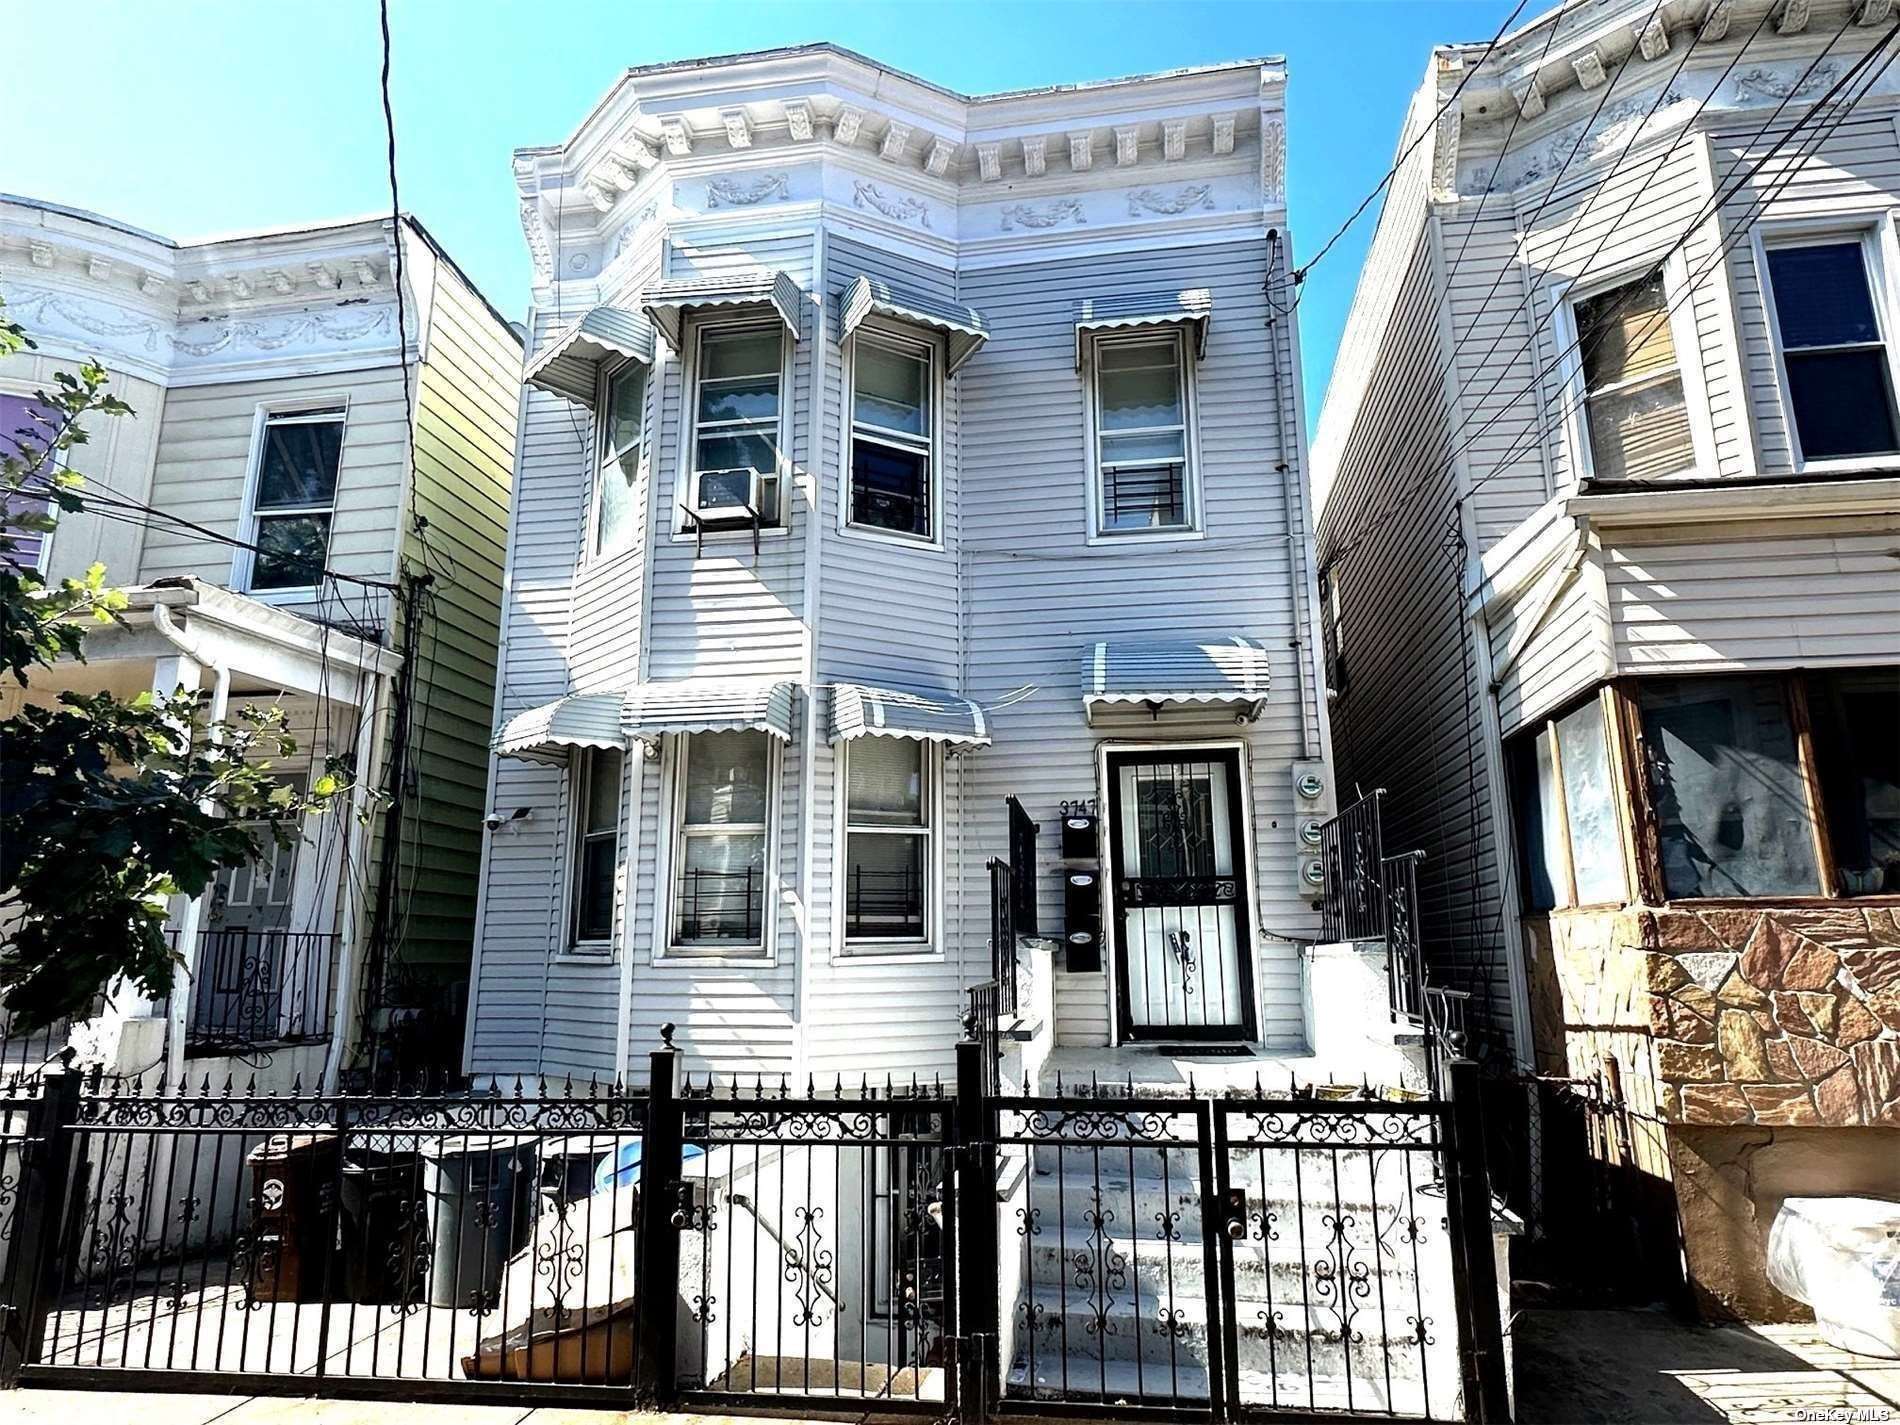 3747 Olinville Avenue, Bronx, New York - 7 Bedrooms  
2 Bathrooms  
16 Rooms - 